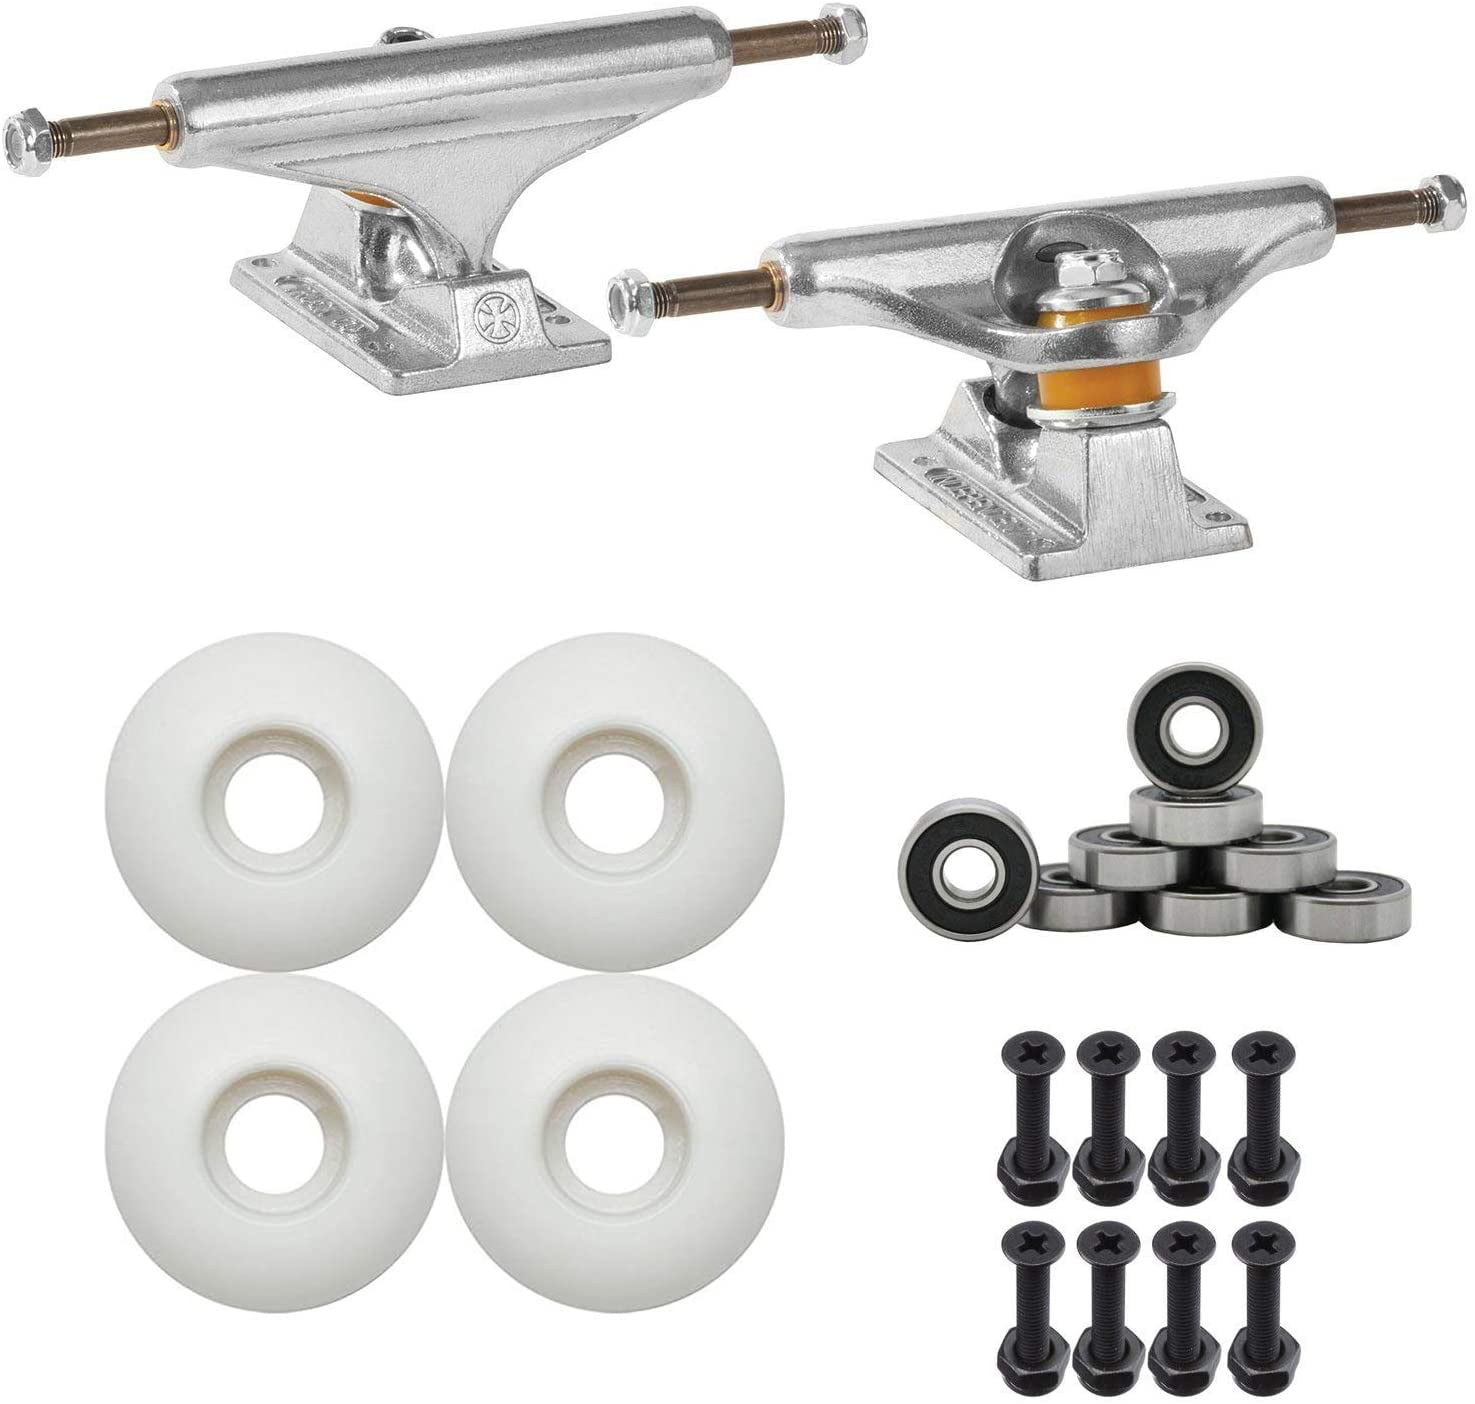 INDEPENDENT 139mm Skateboard TRUCKS 52mm Wheels and Bearings COMBO PACKAGE 